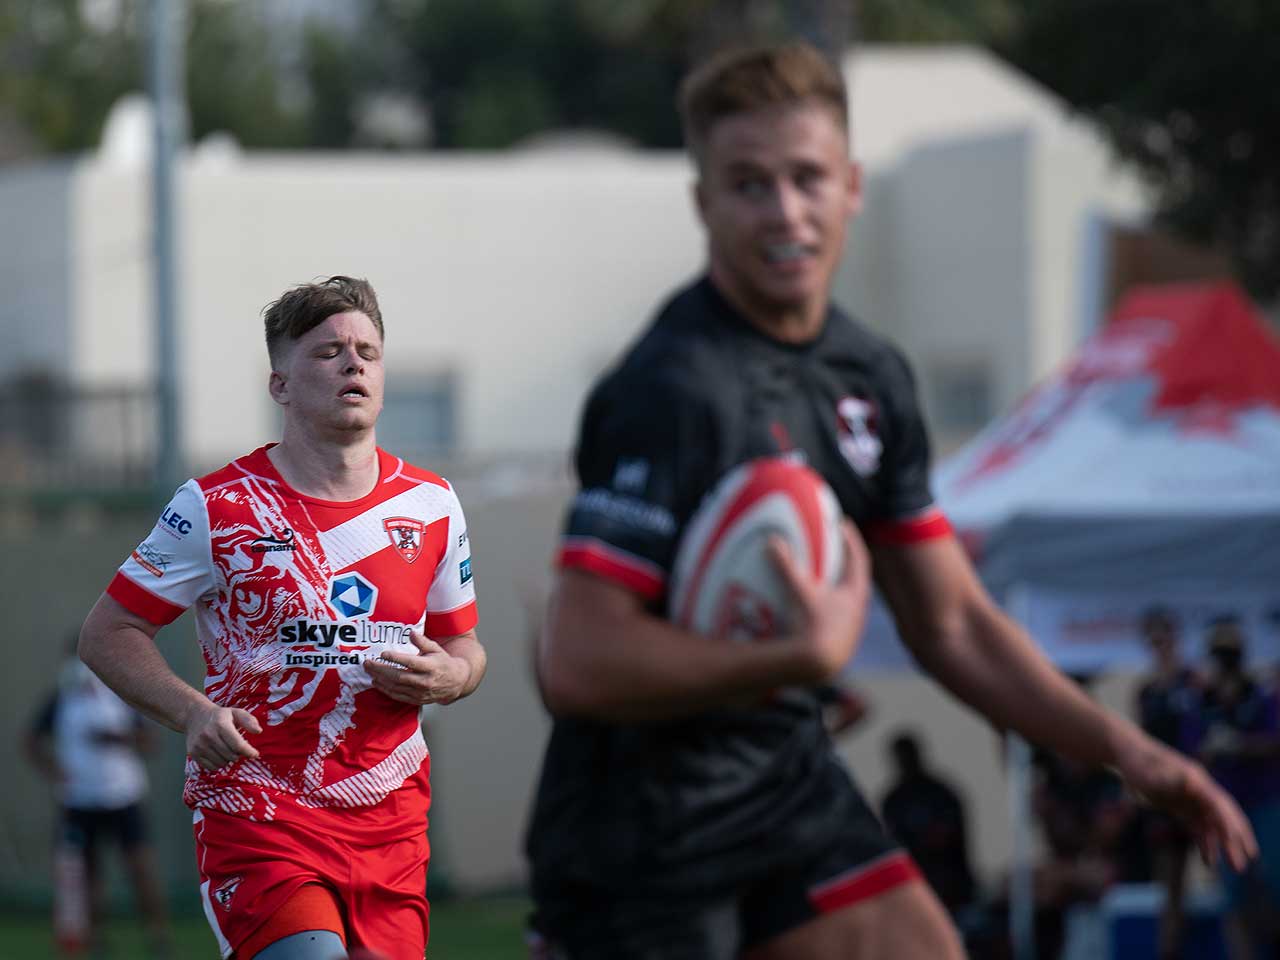 Dubai Tigers Rugby Club player gives up the chase